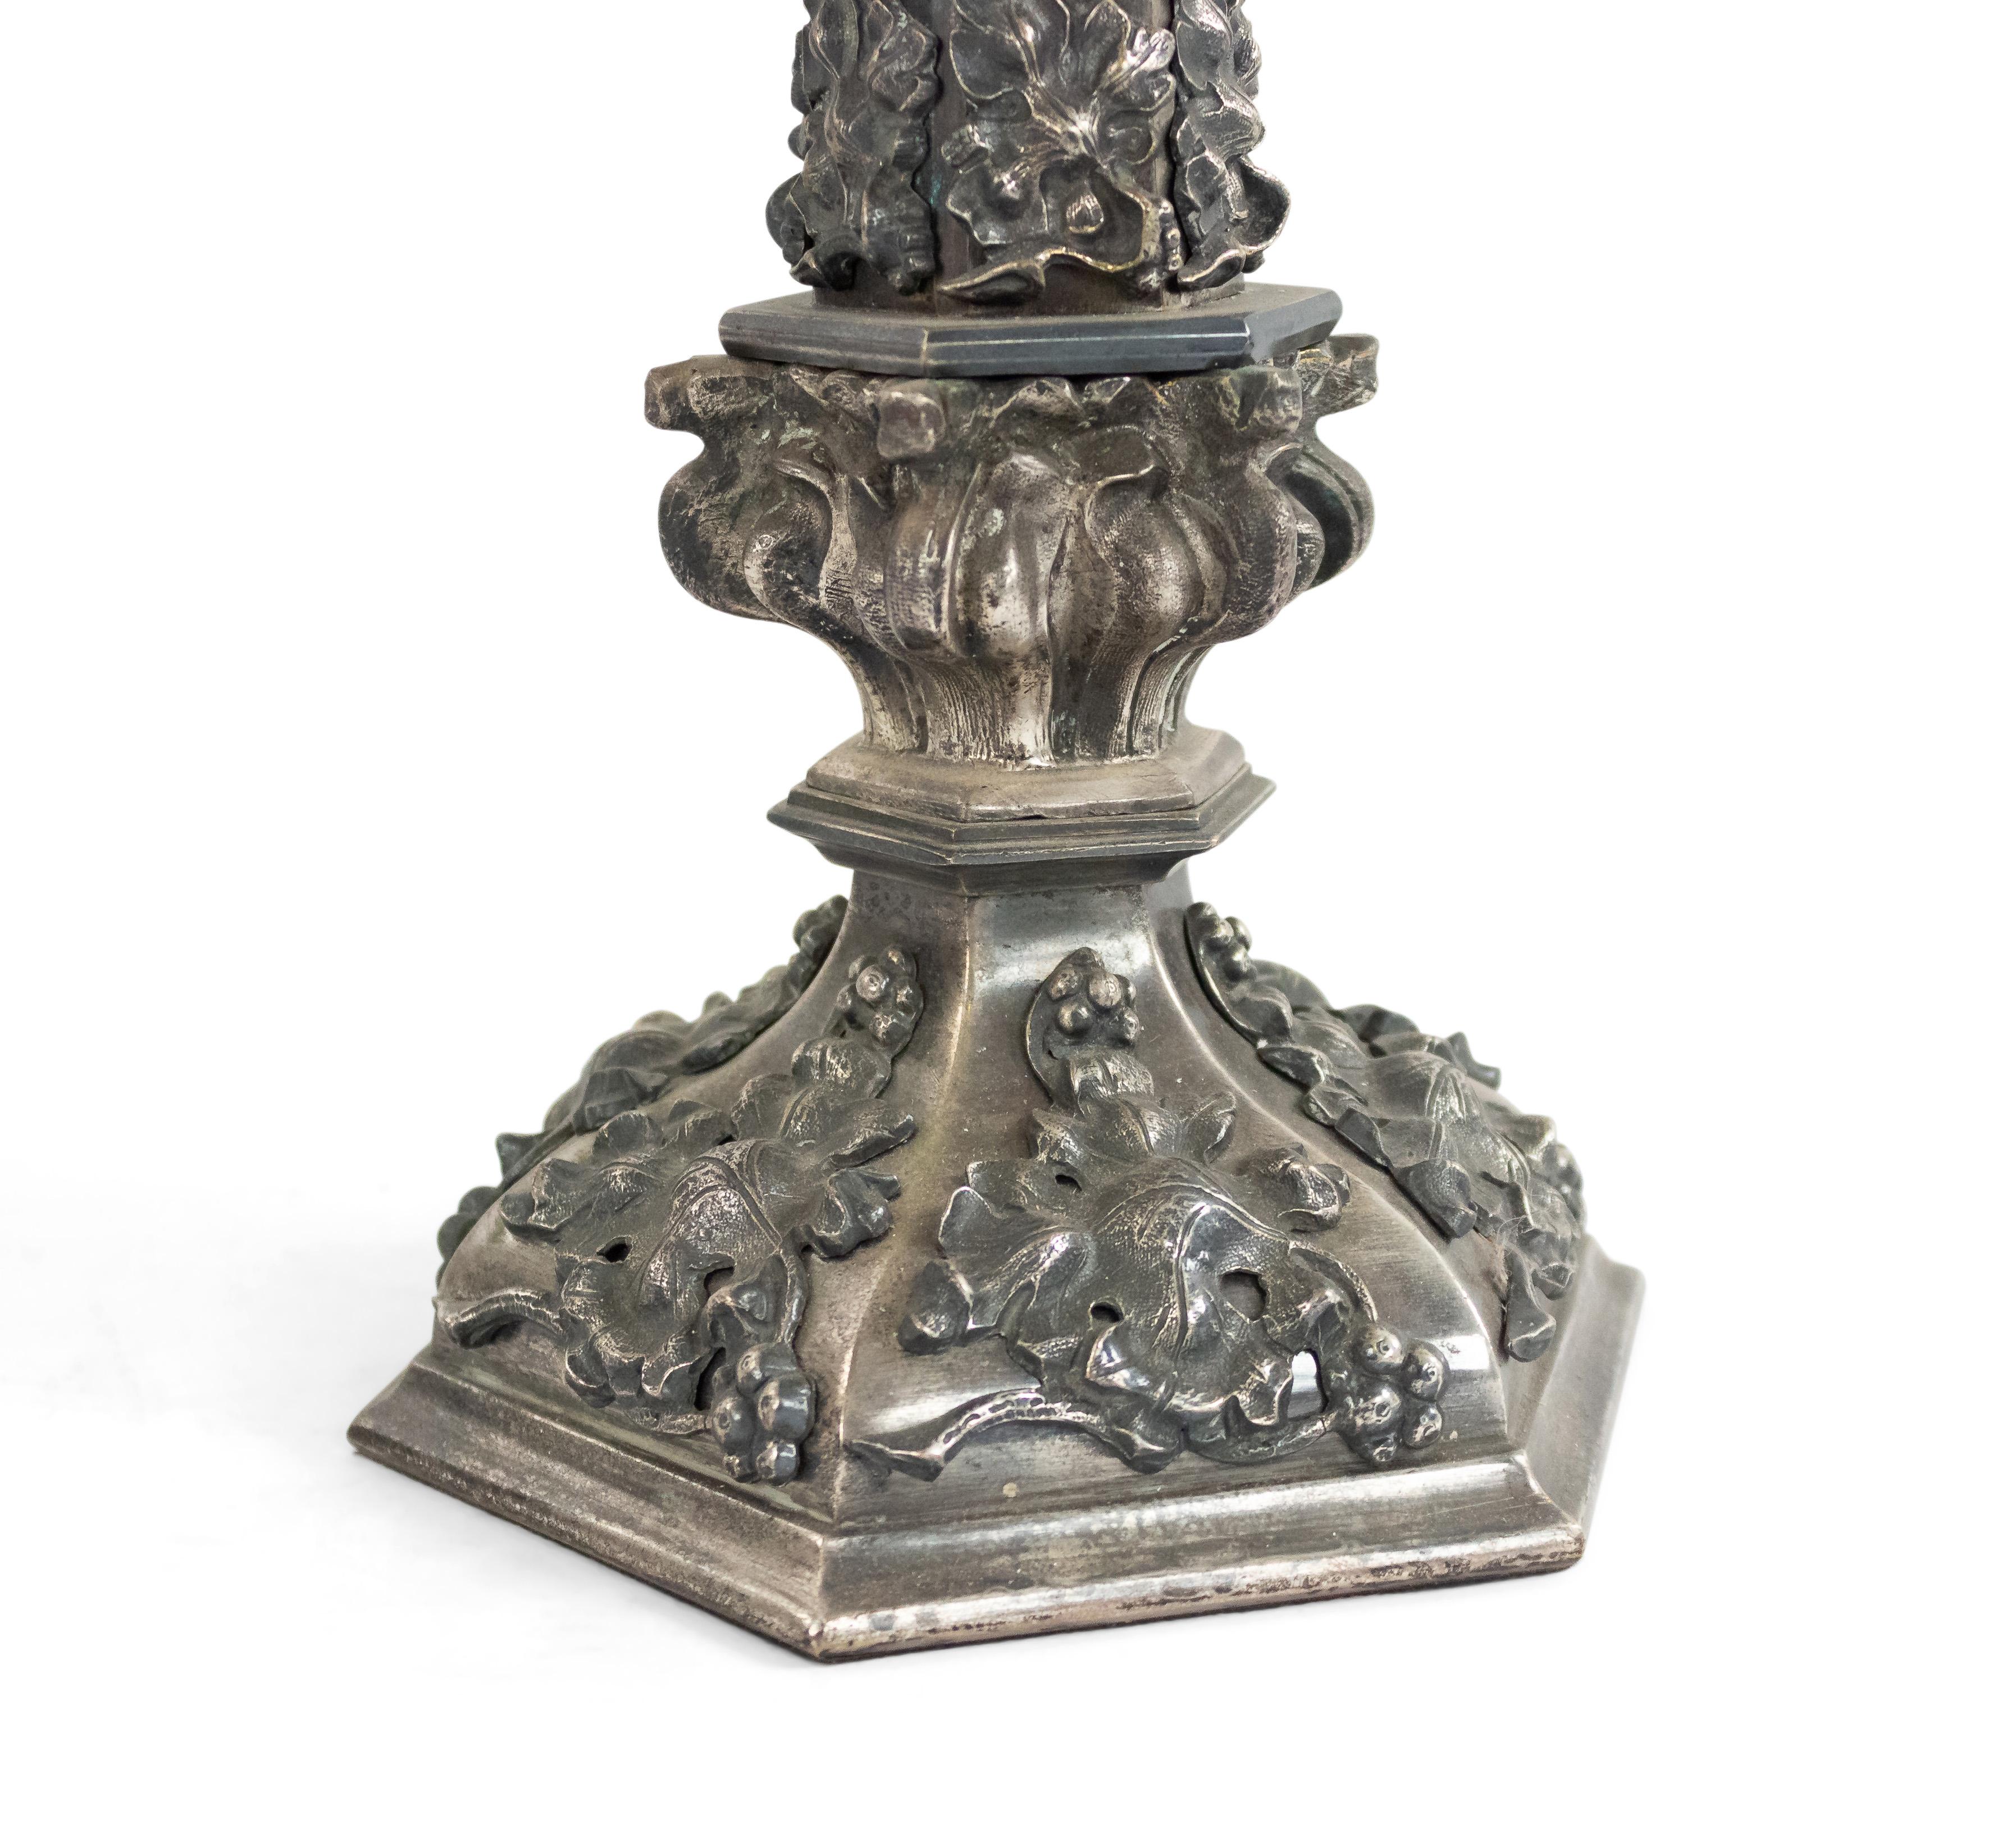 English Victorian silver plate 6 sided column form altar stick mounted as a table lamp with applied oak leaves and floral trim.